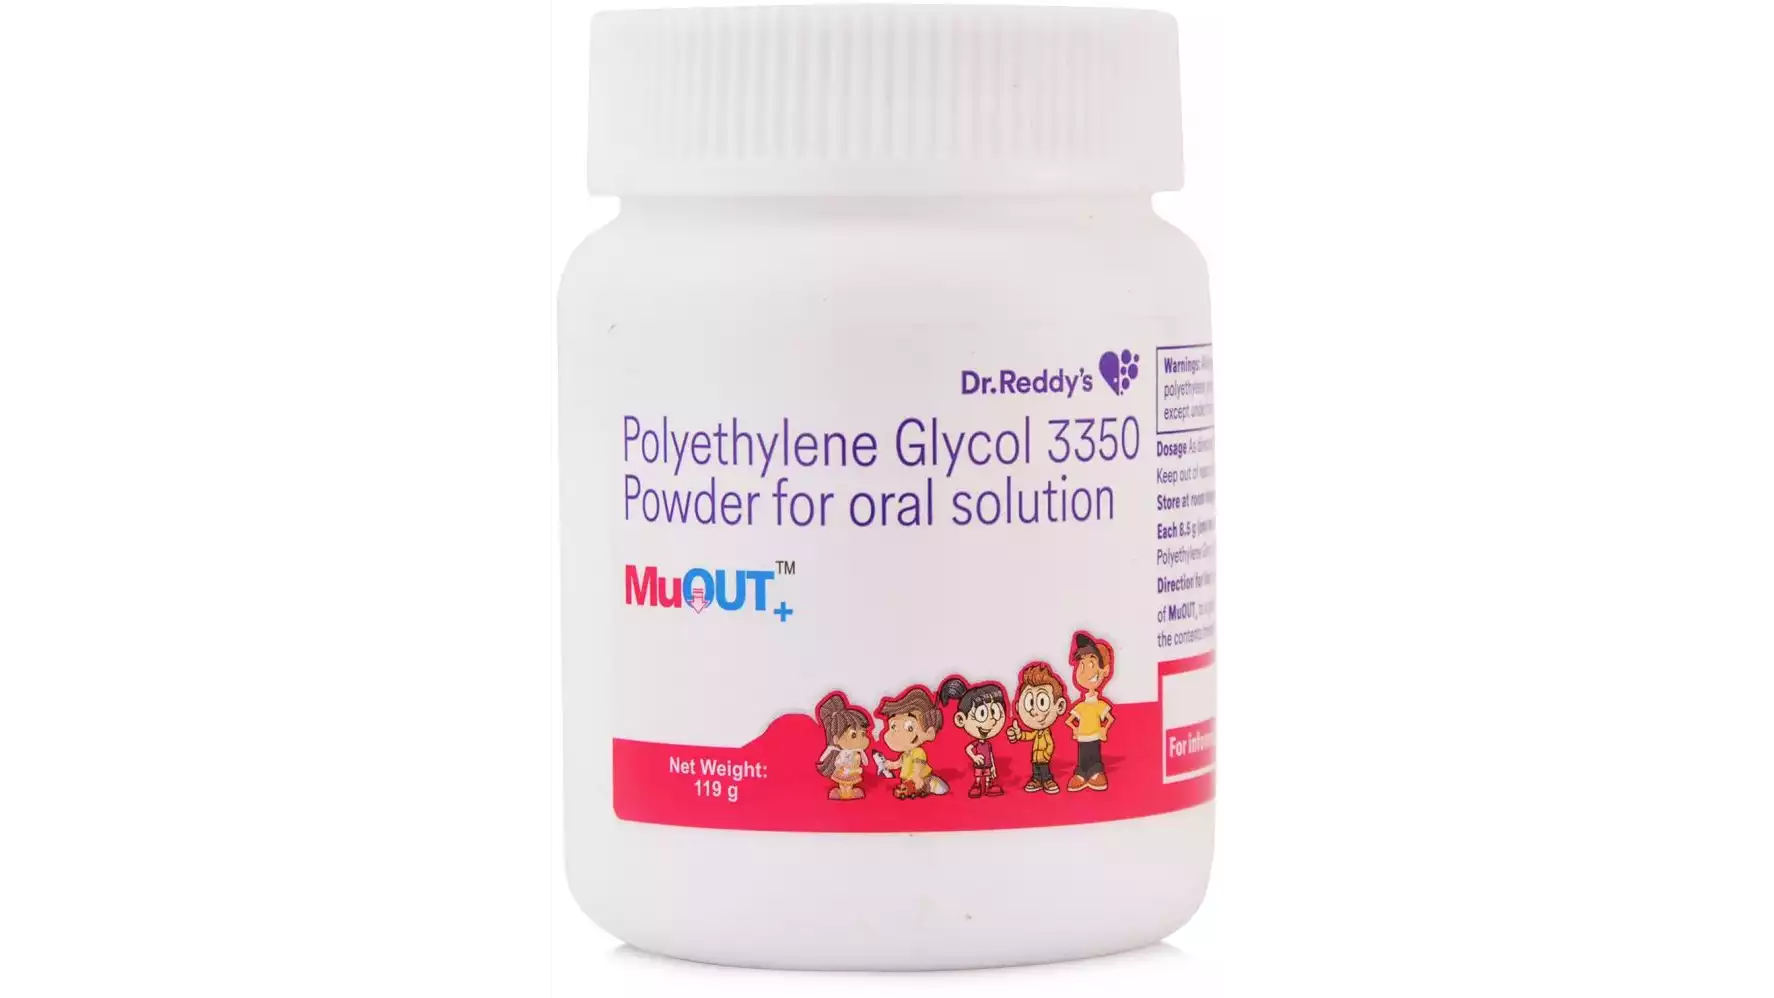 Muout Plus Powder for Oral Solution (119g)